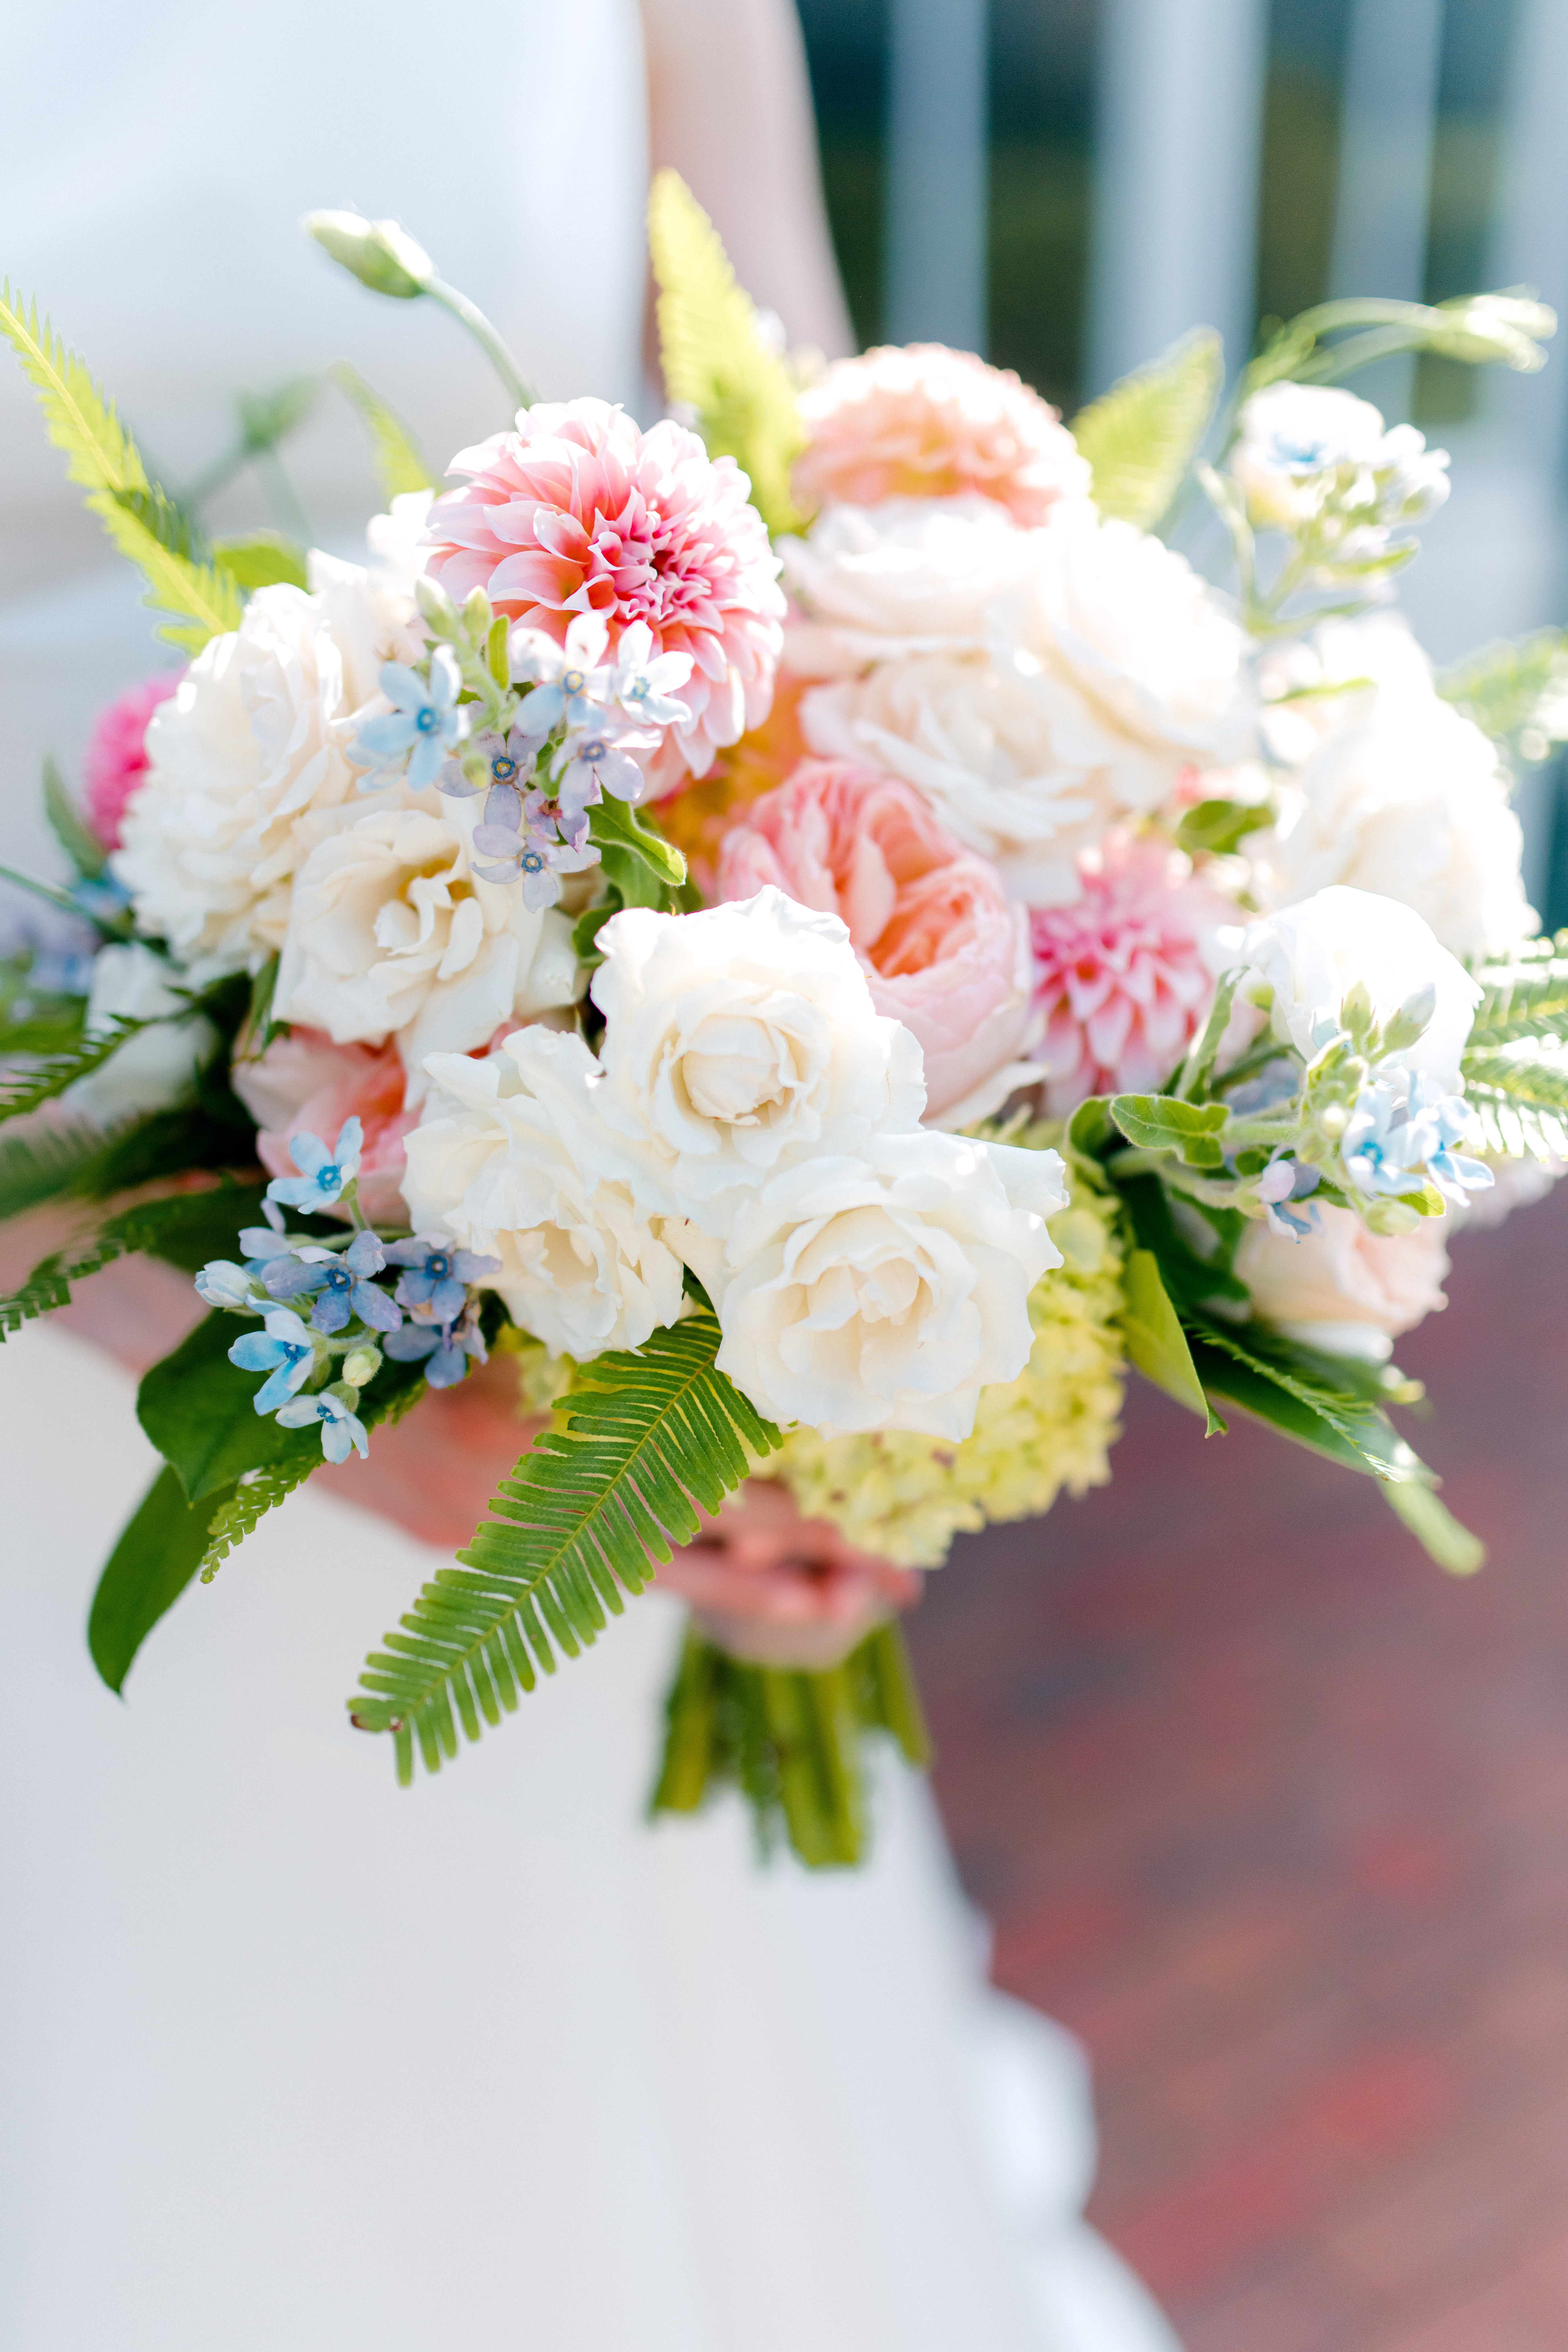 Stunning Bouquet from Southern Blooms!